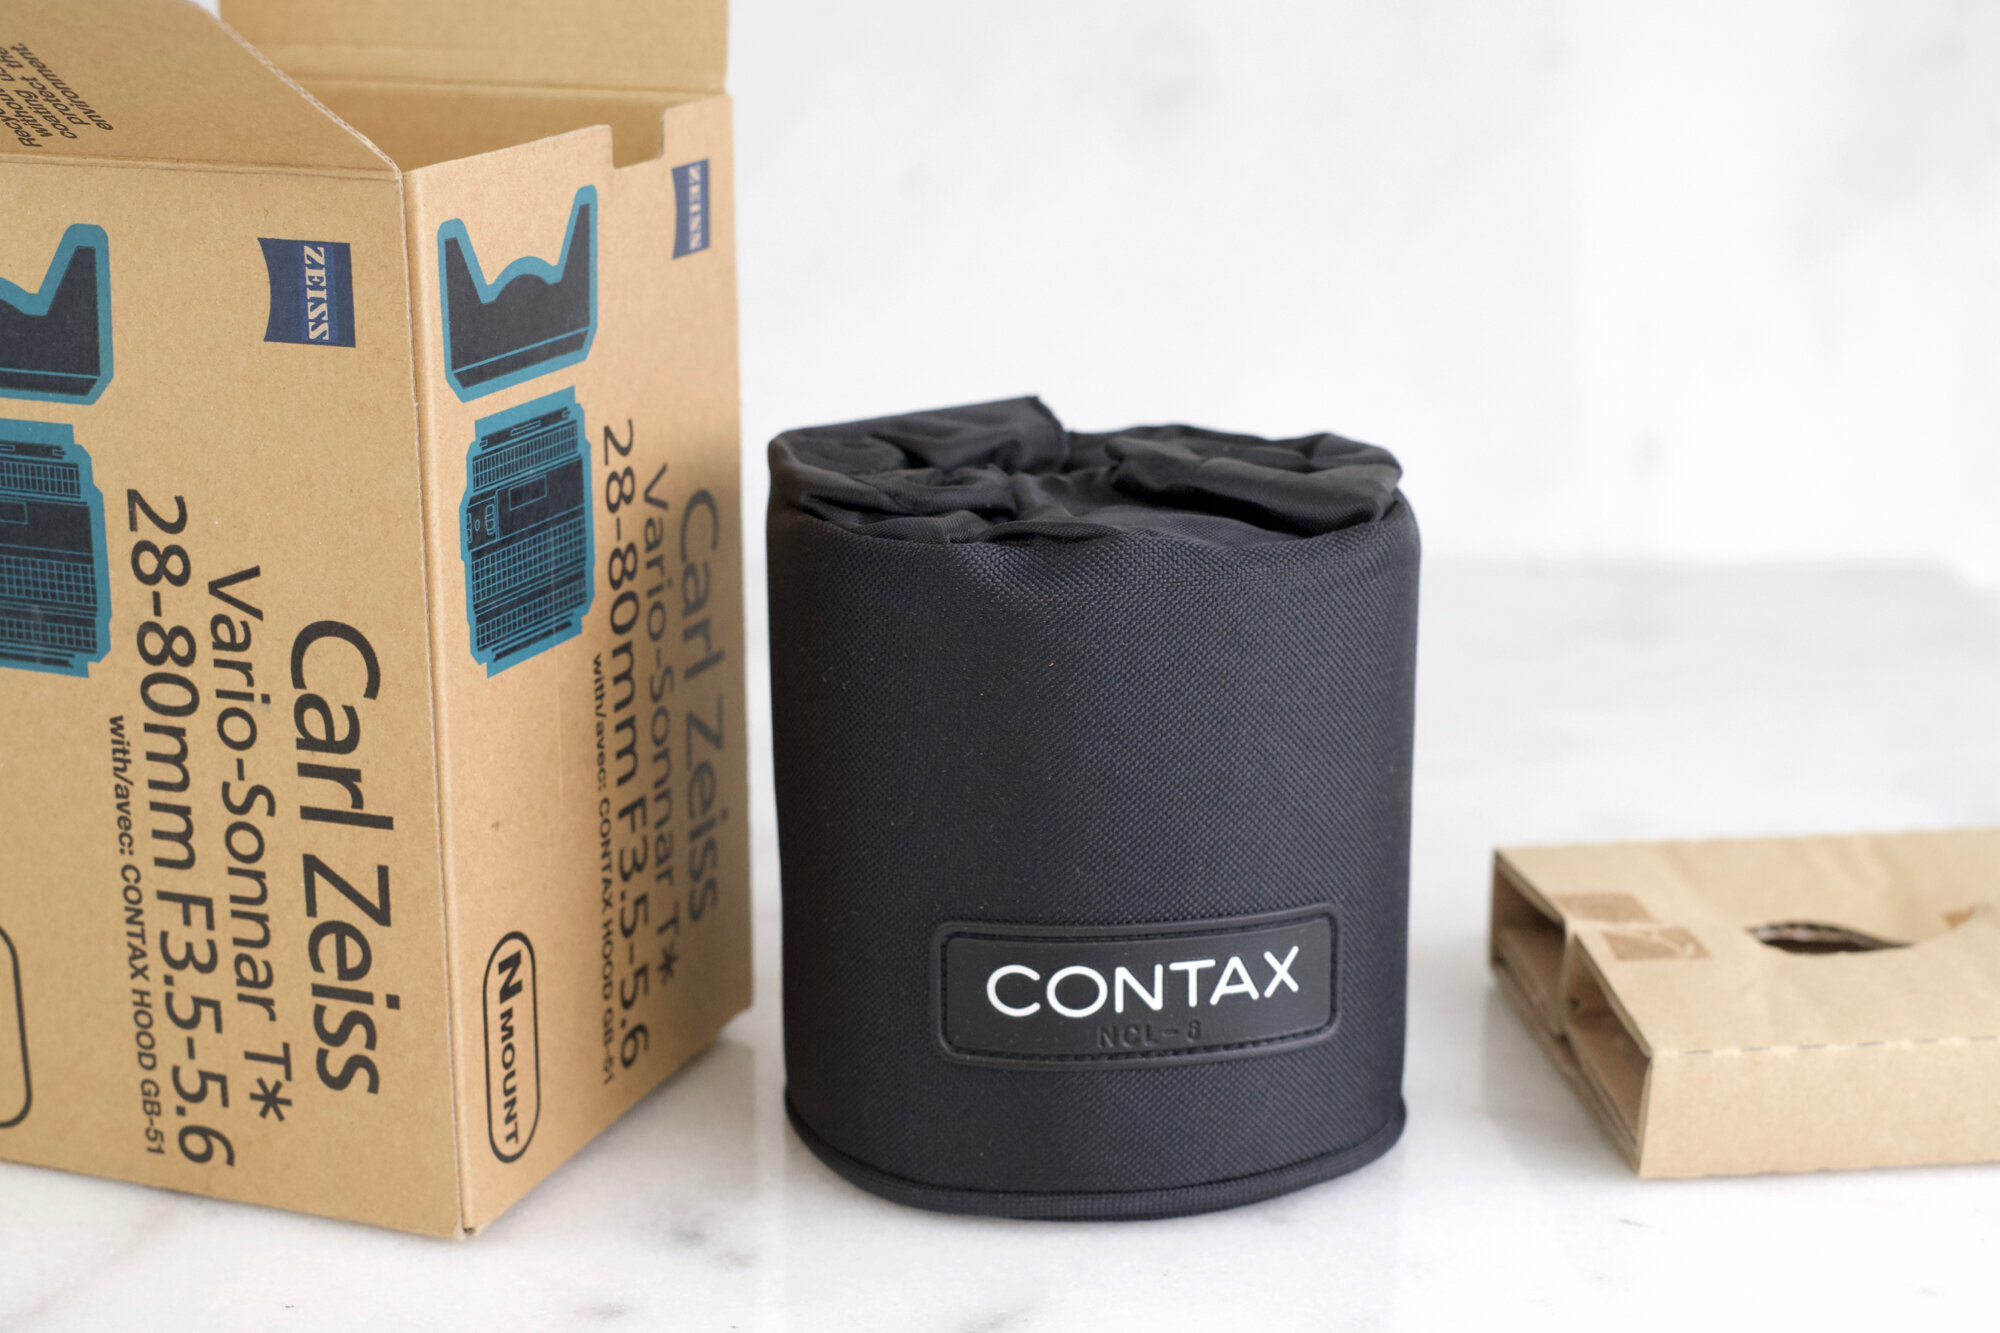 Contax N Mount Carl Zeiss Vario Sonnar 28-80mm f/3.5-5.6 Lens Box with Soft  Lens Case and Contax GB-51 Lens Hood - Pristine, Like New — F Stop Cameras